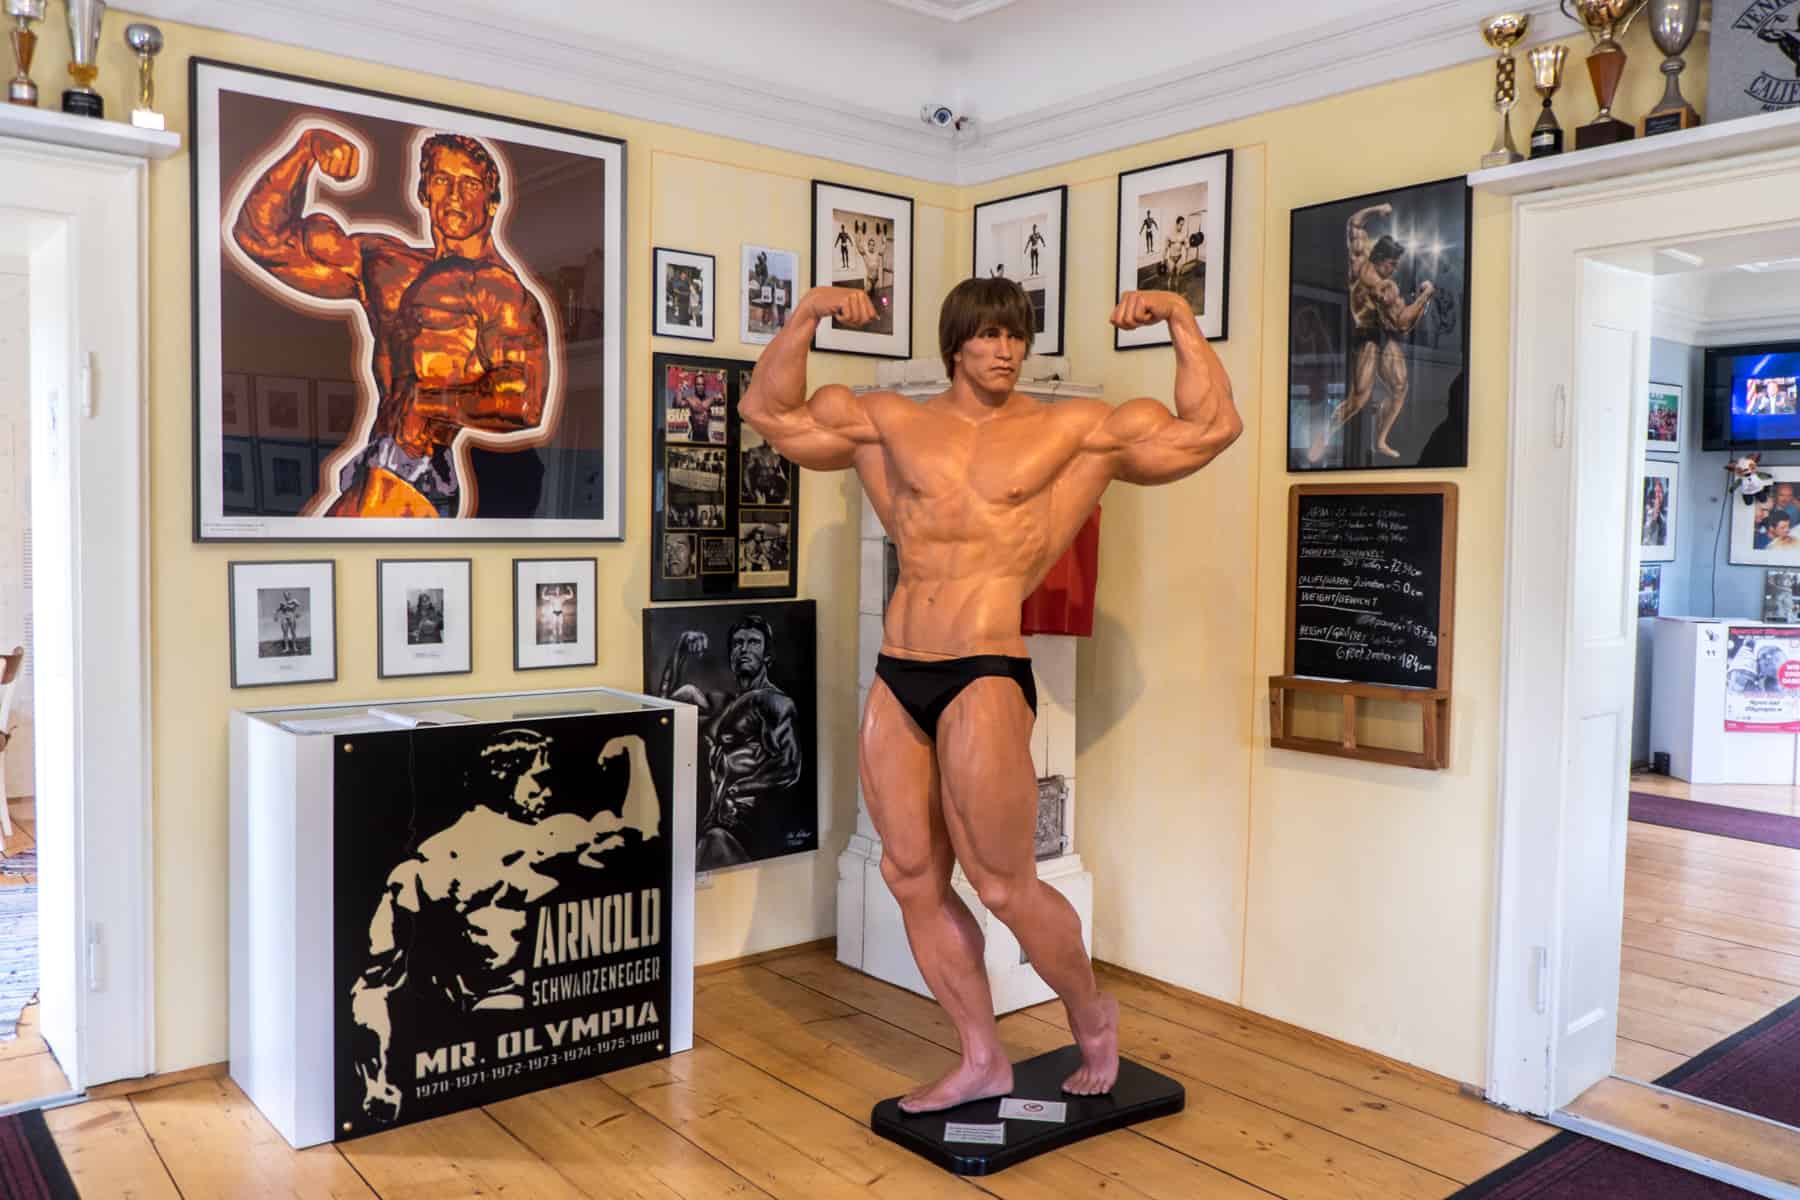 A lifesize Bodybuilder figure surrounded by wall pictures inside the Arnold Schwarzenegger Museum in Thal, Austria